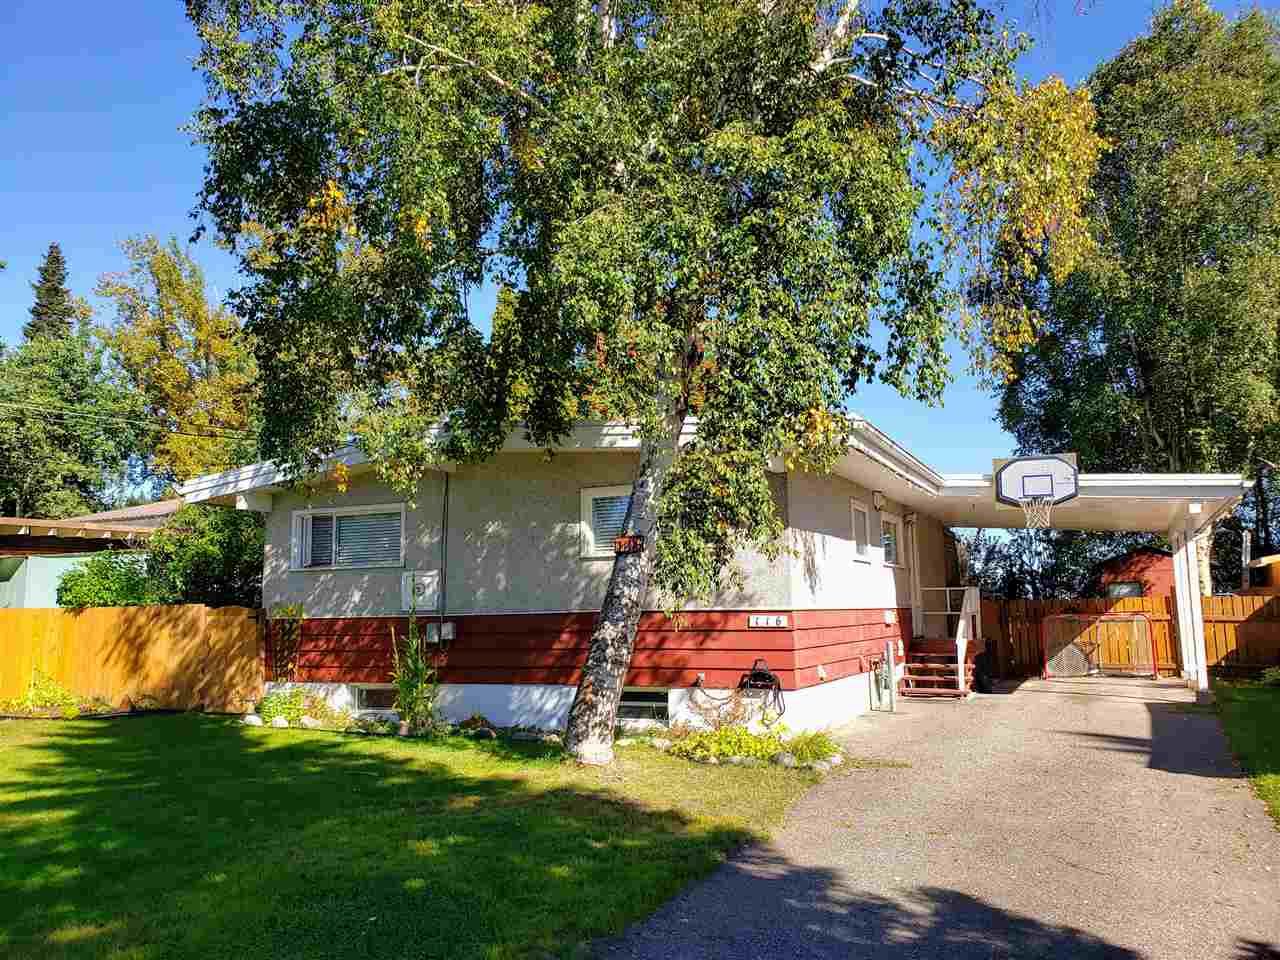 Main Photo: 116 DOUGLAS Street in Prince George: Nechako View House for sale (PG City Central (Zone 72))  : MLS®# R2497558